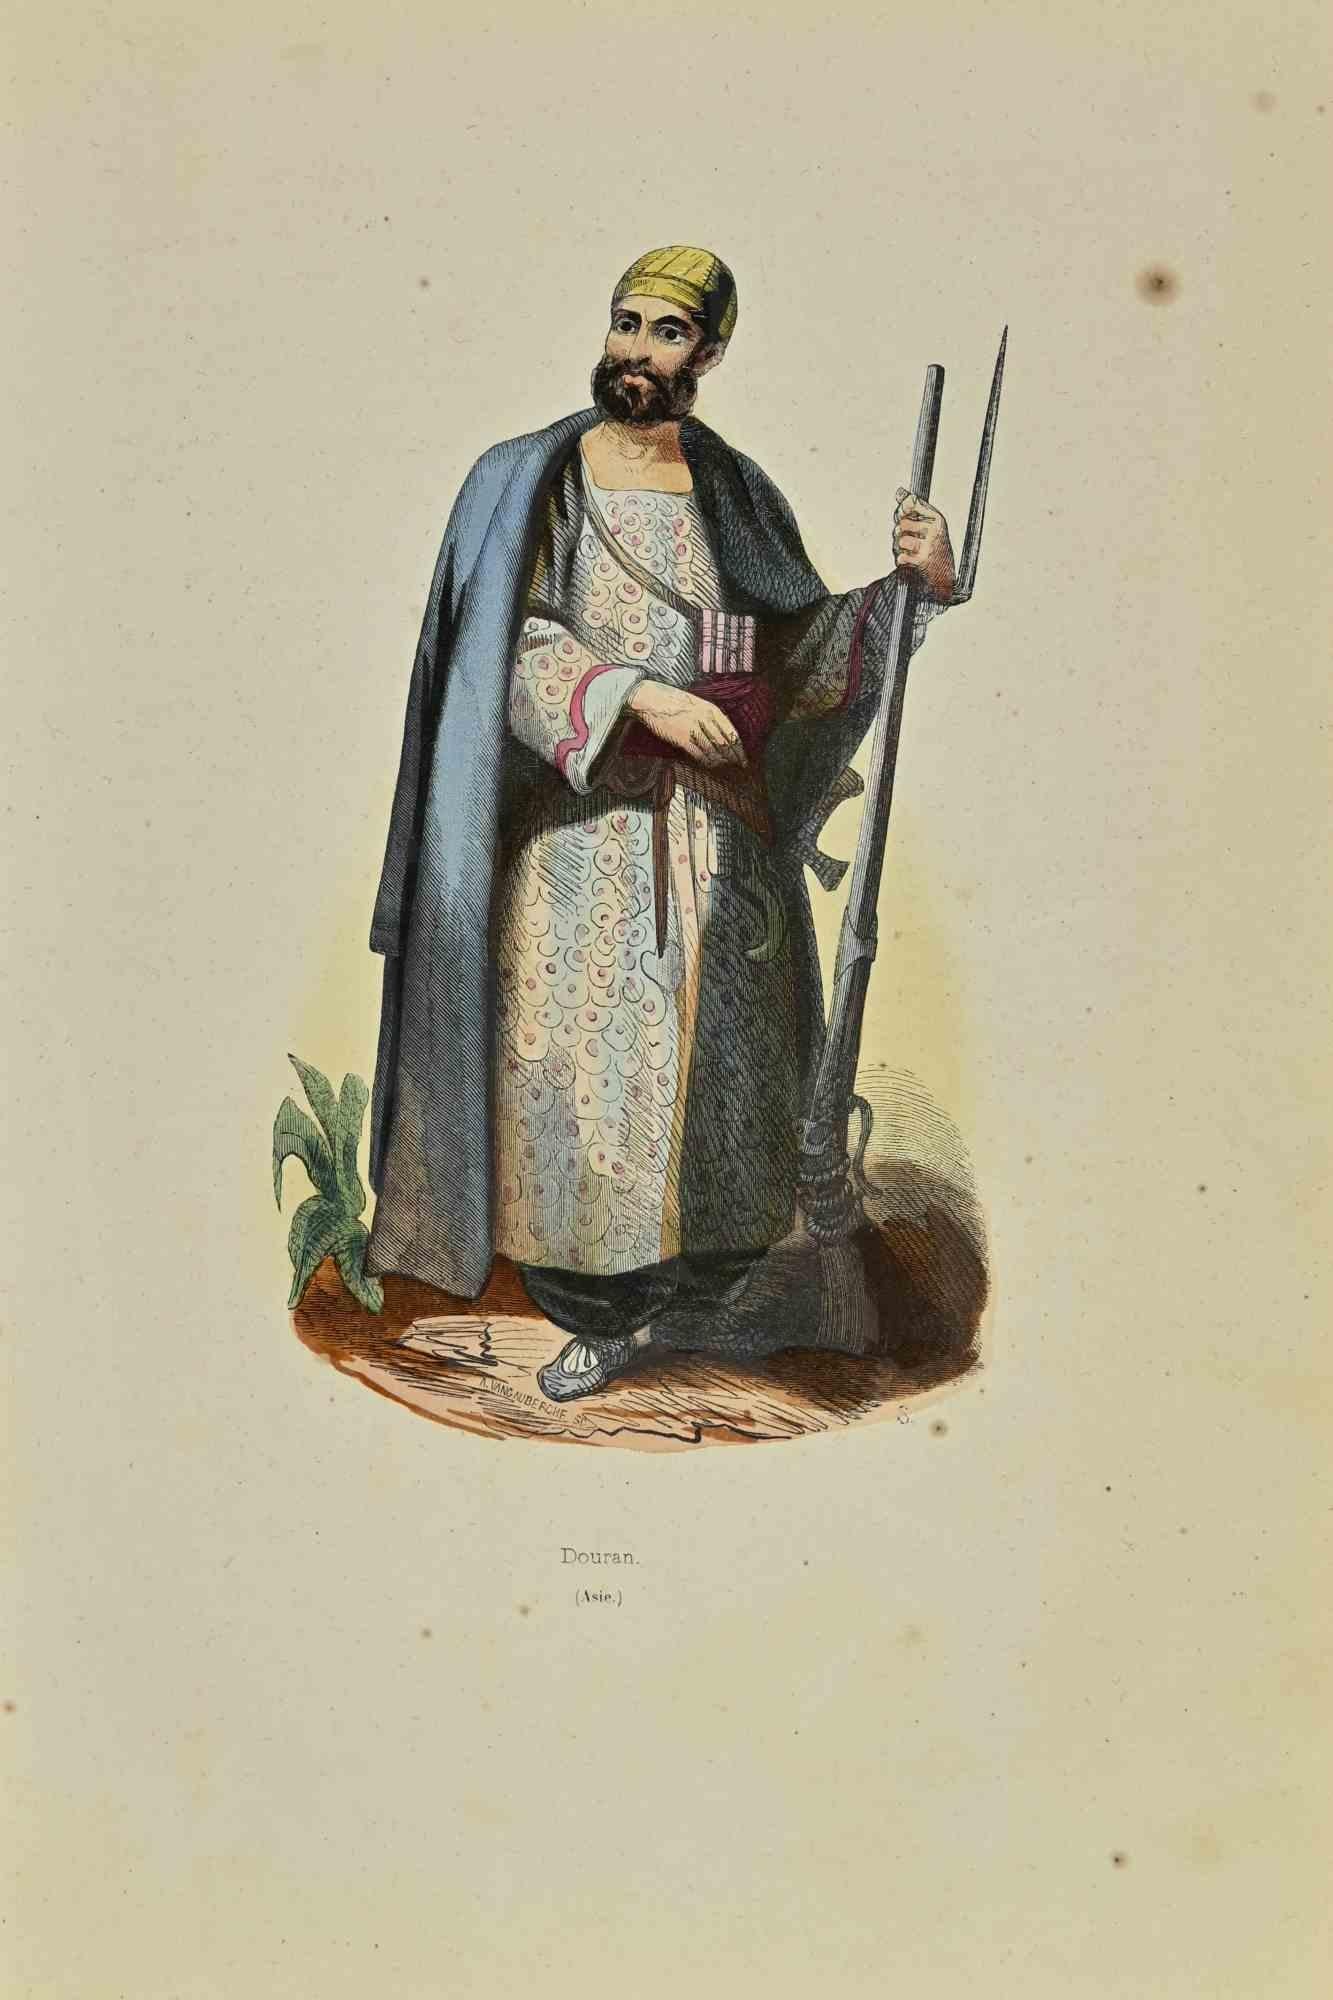 Douran - Lithograph by Auguste Wahlen - 1844